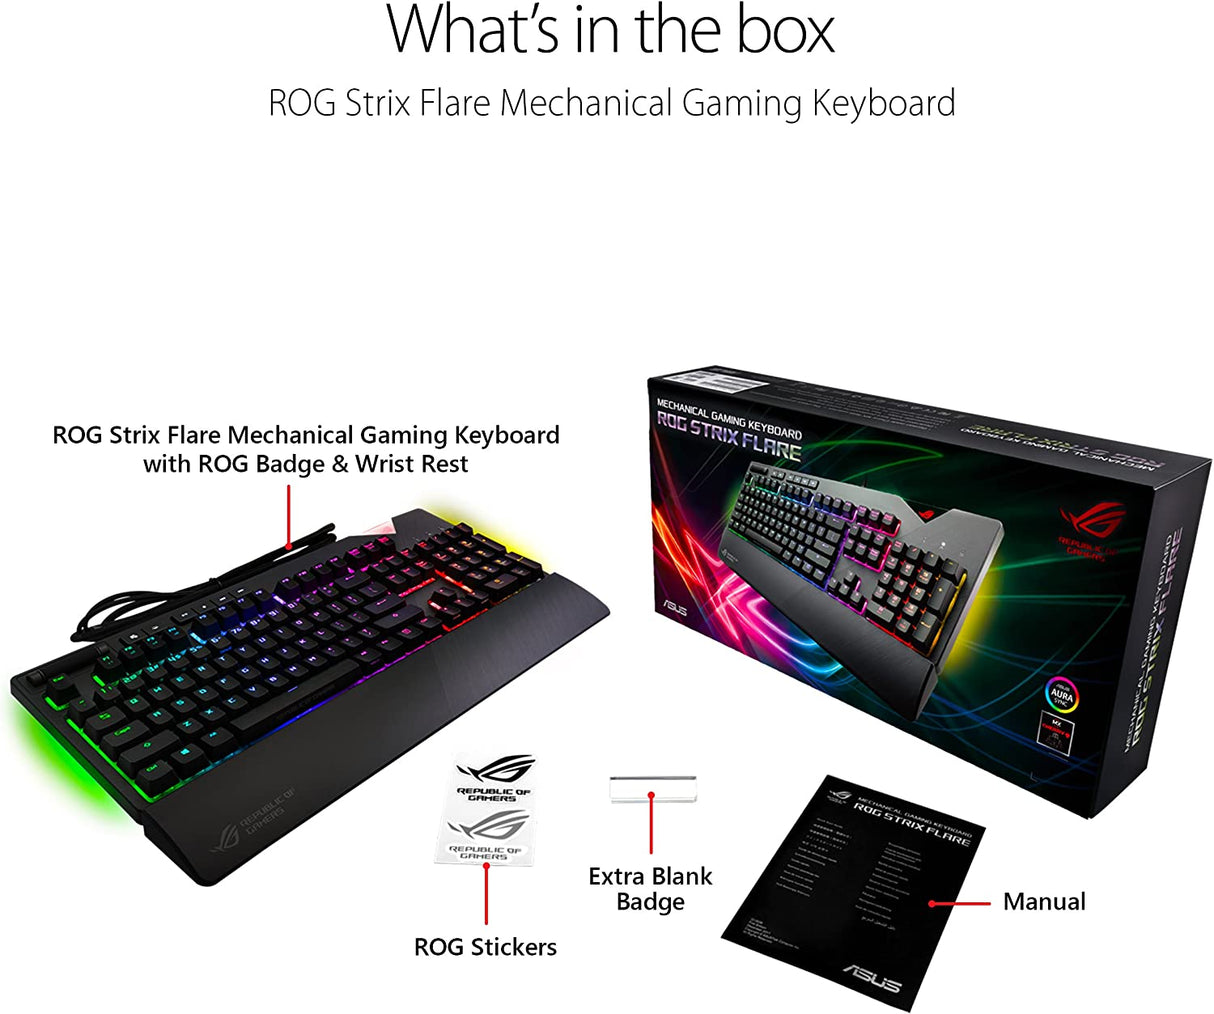 ASUS ROG Strix Flare (Cherry MX Red) Aura Sync RGB Mechanical Gaming Keyboard with Switches, Customizable Badge, USB Pass Through and Media Controls